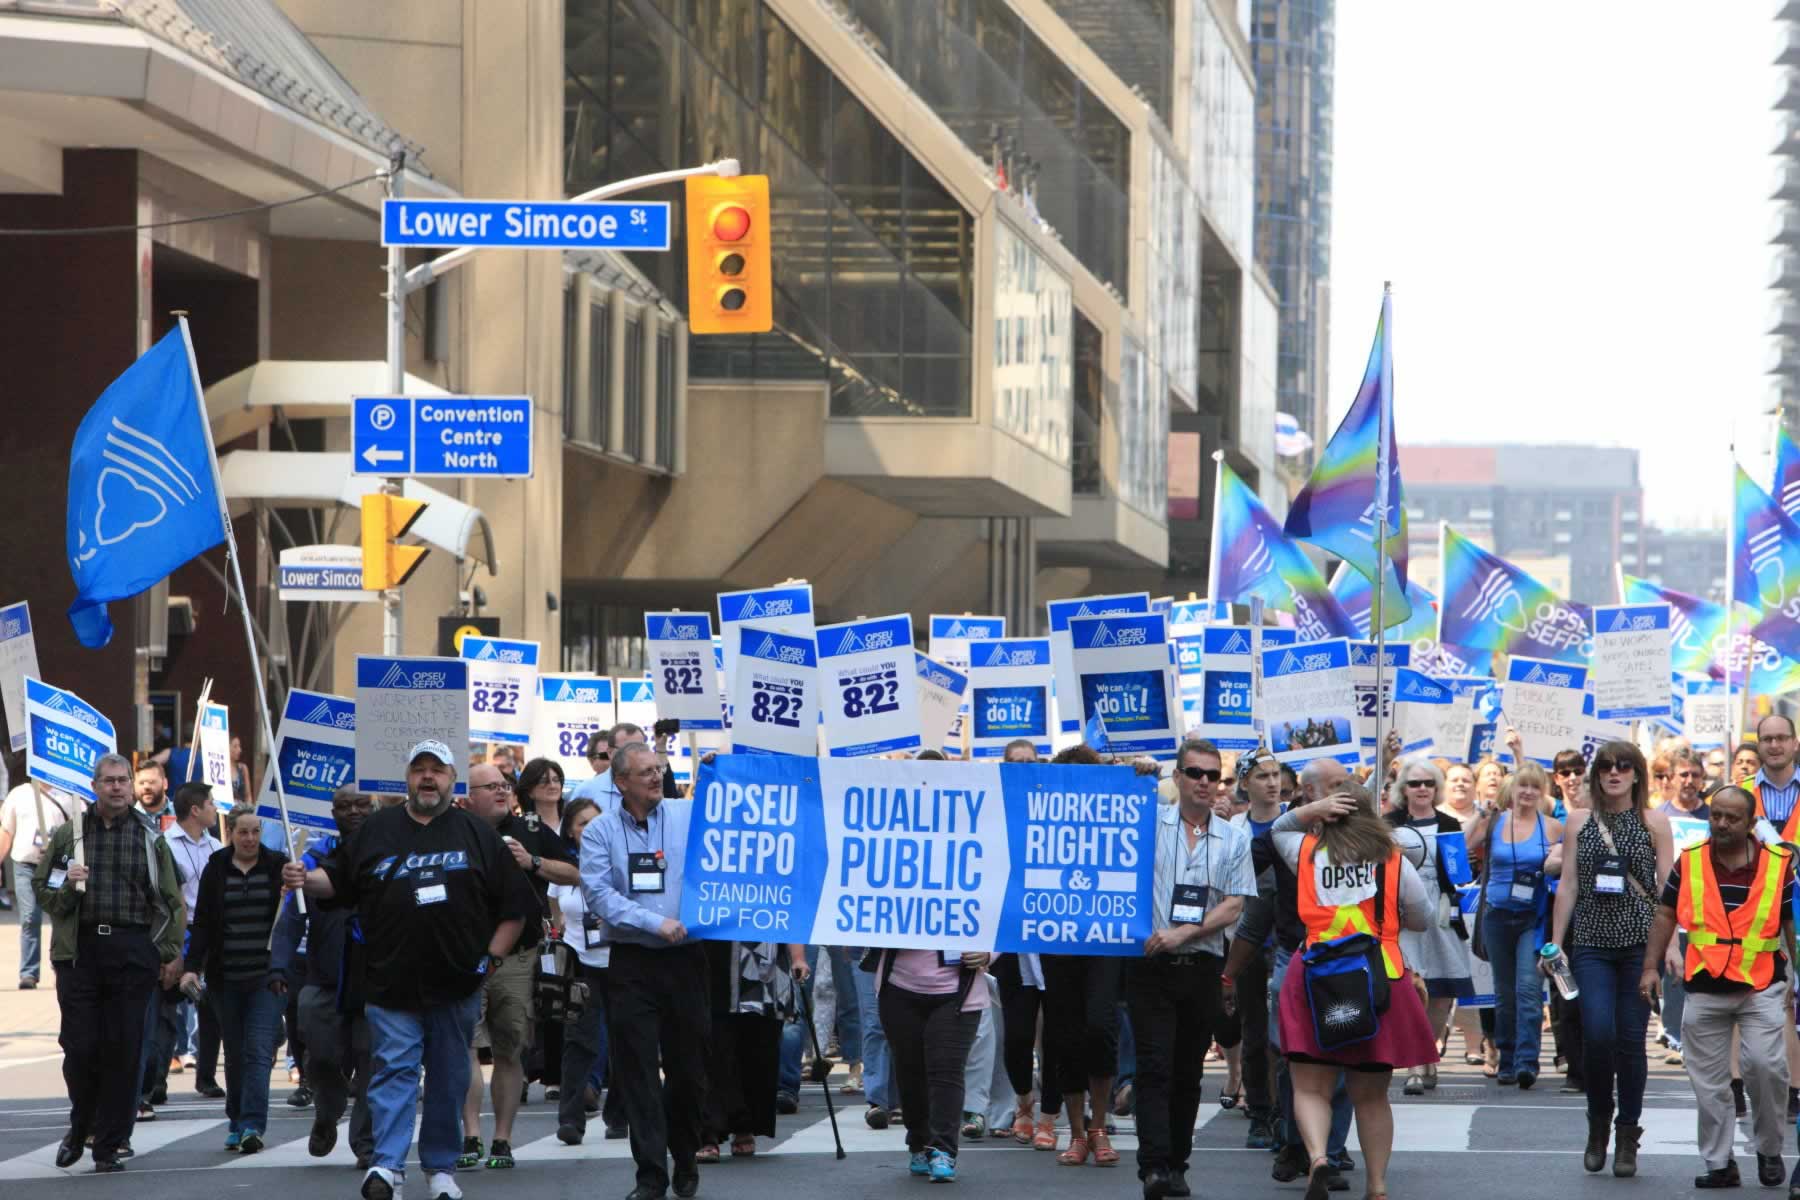 Large group of OPSEU members holding signs, flags, and a "Quality Public Services" banner march in downtown Toronto during Convention 2015